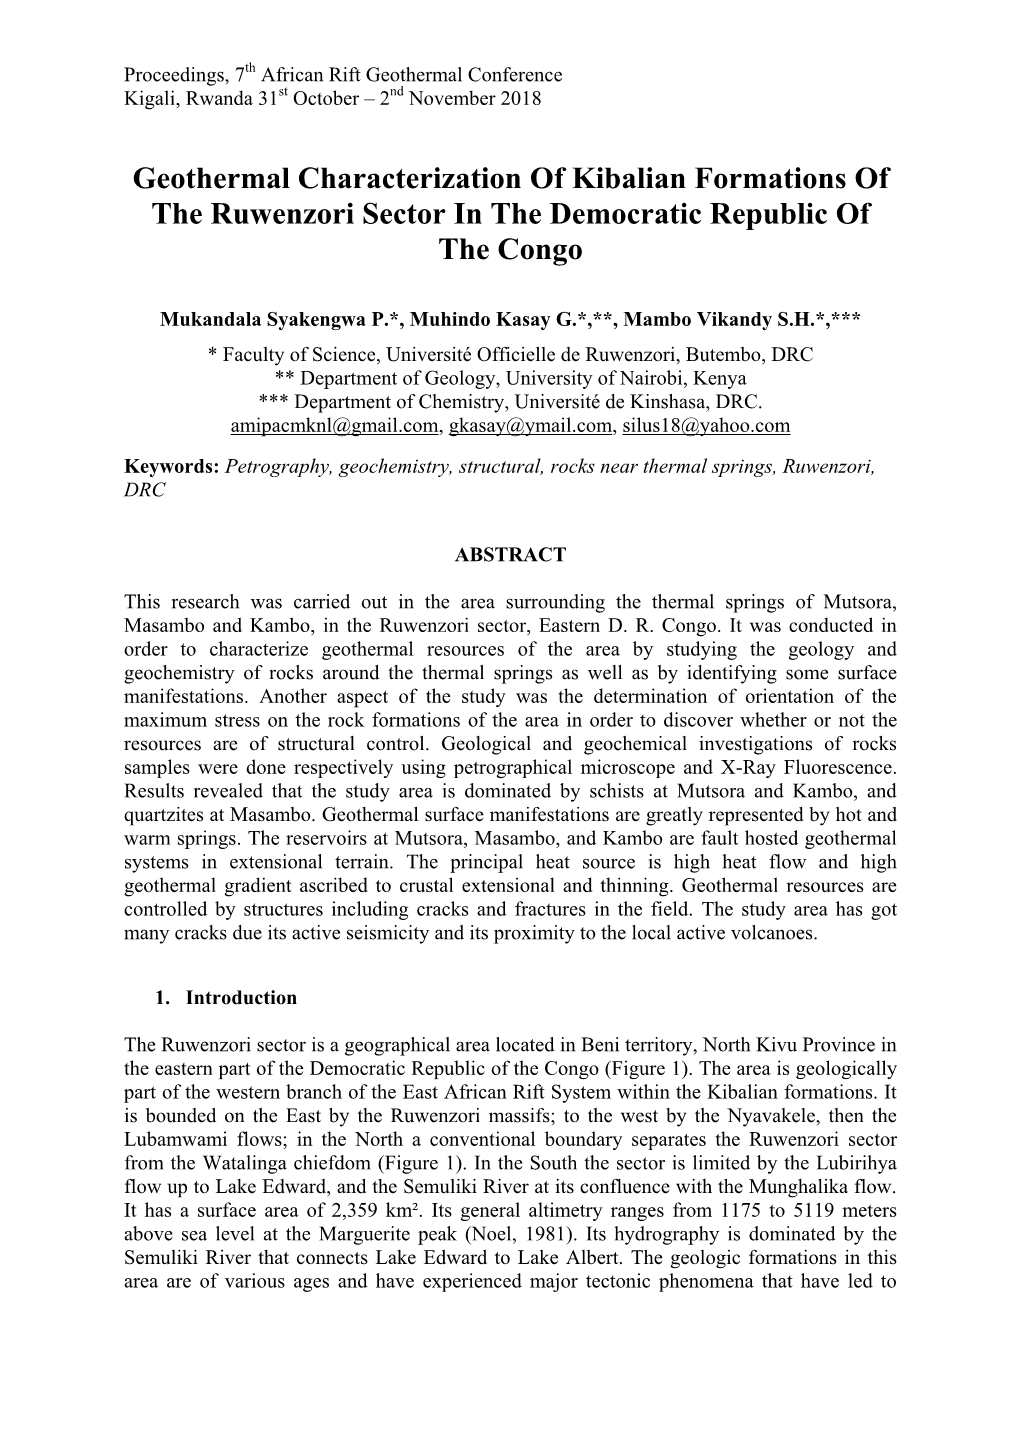 Geothermal Characterization of Kibalian Formations of the Ruwenzori Sector in the Democratic Republic of the Congo